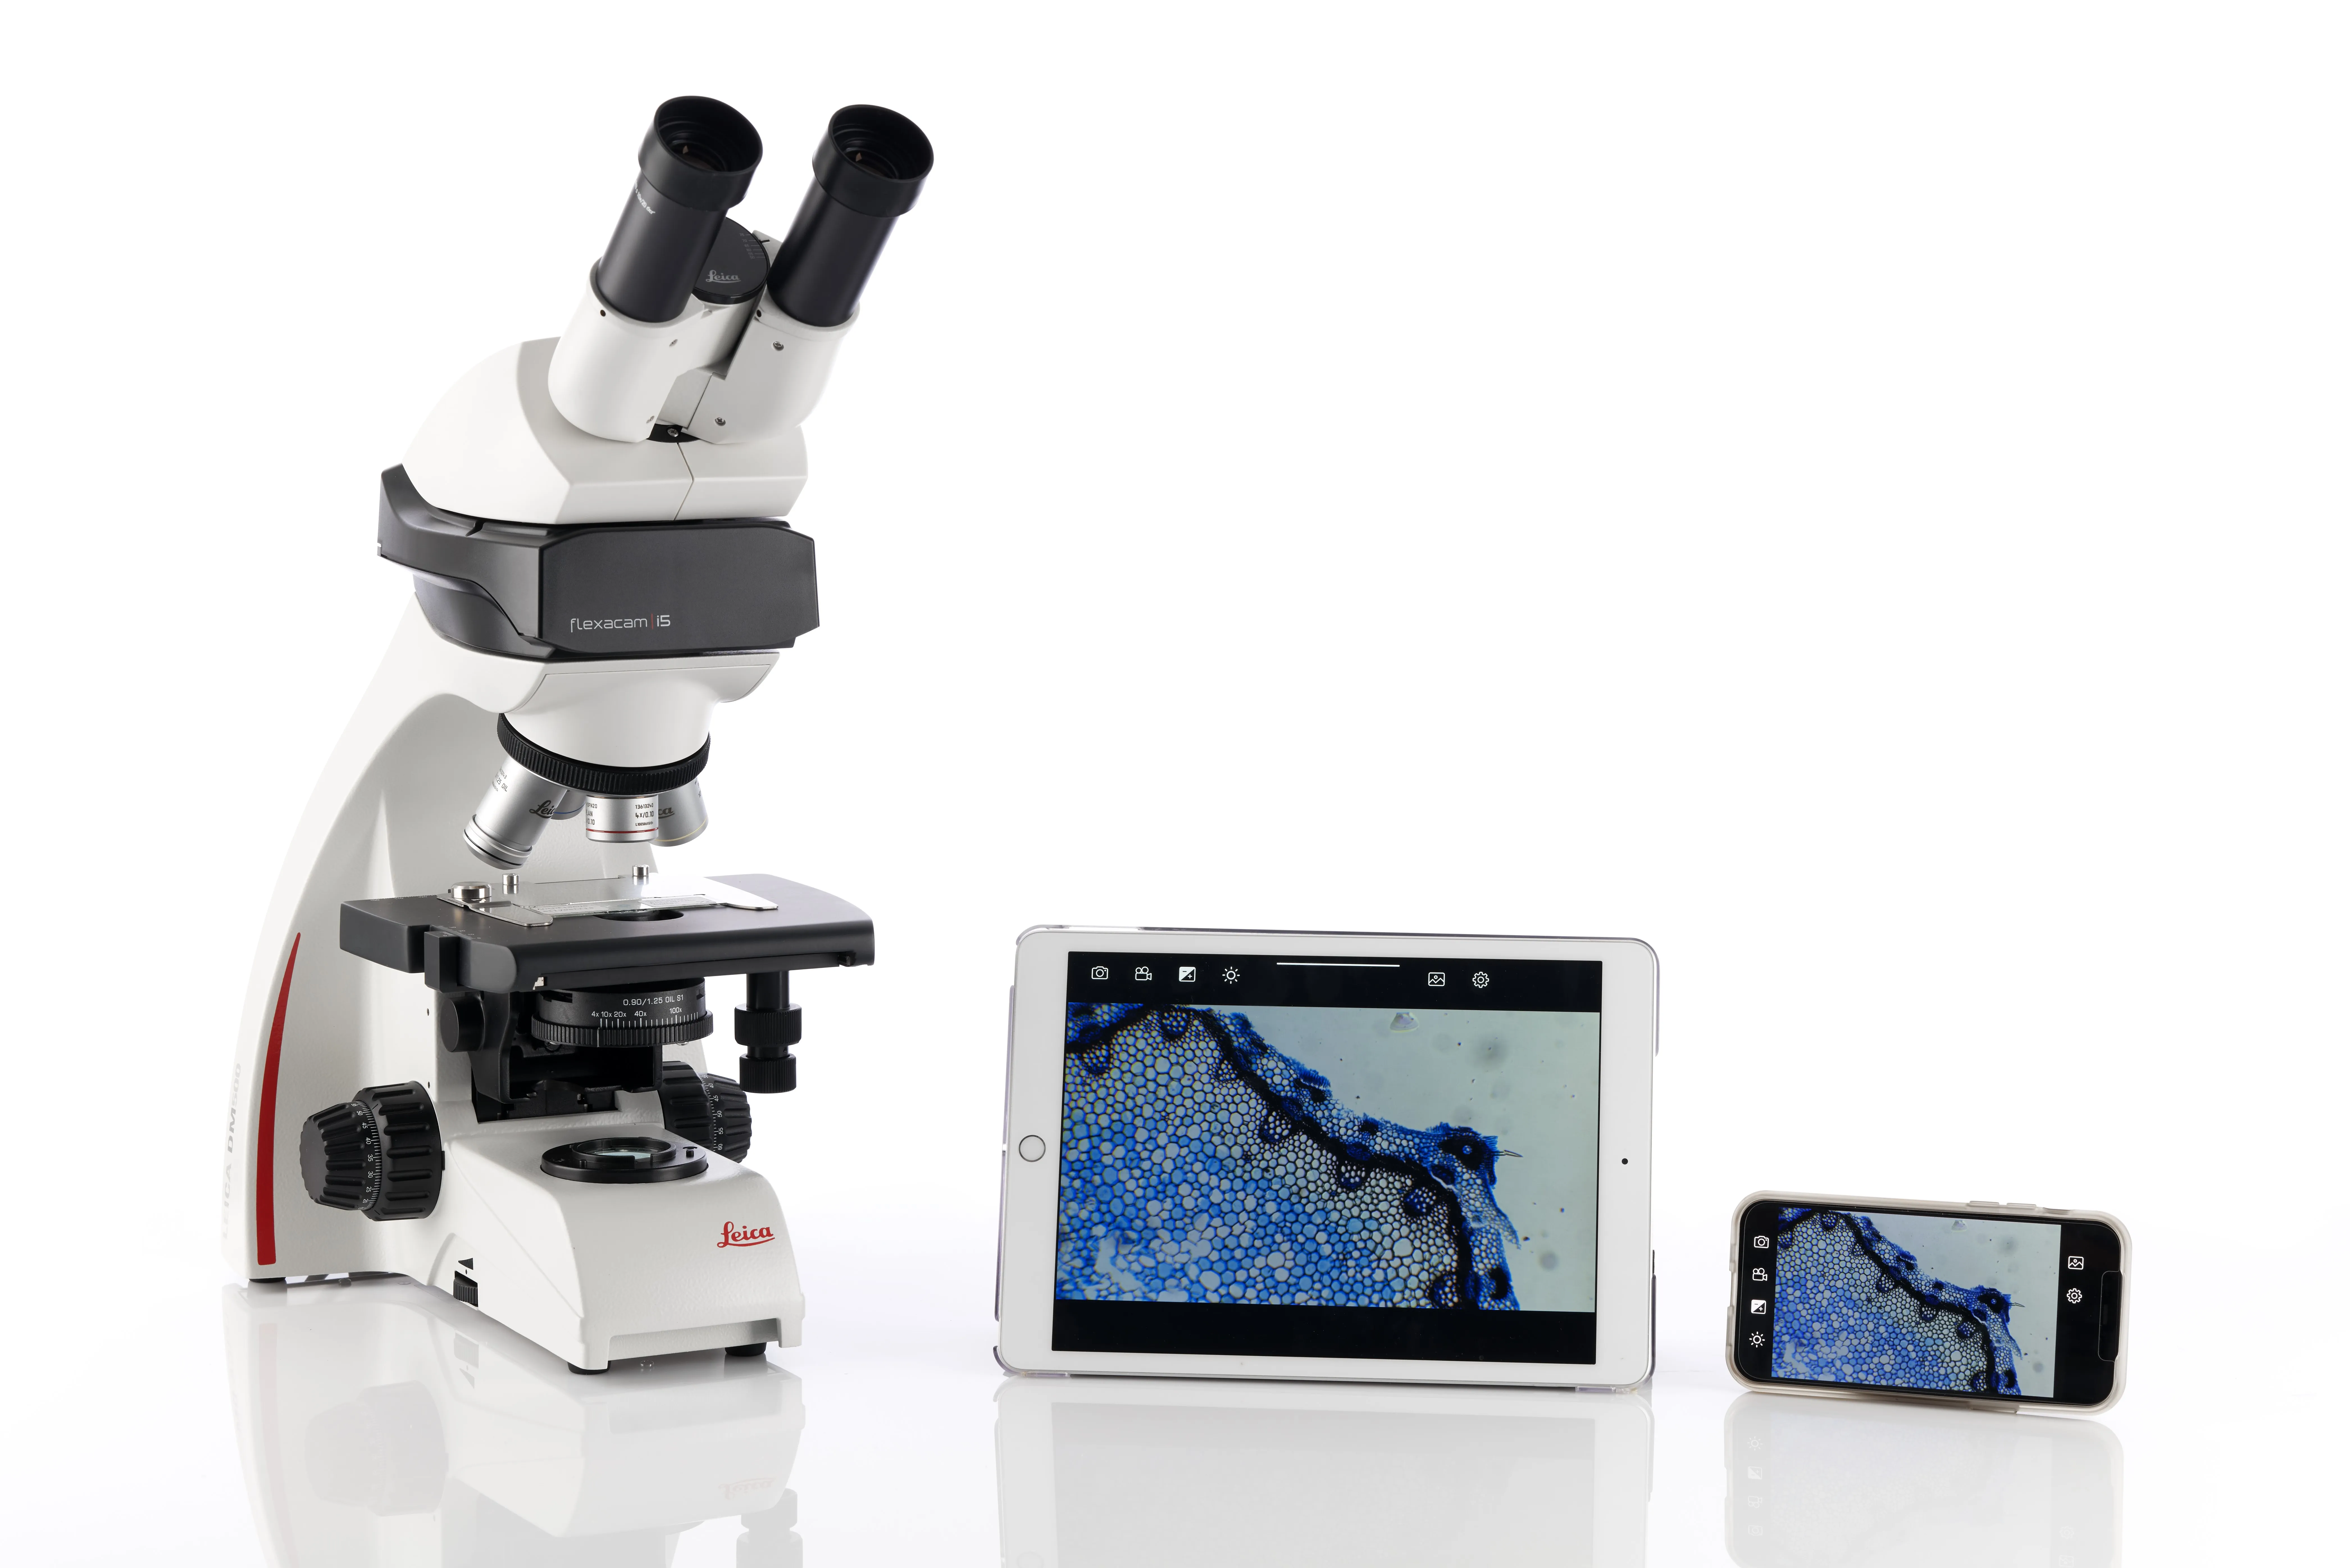 Leica DM500 Educational Microscope with Integrated Wireless Camera